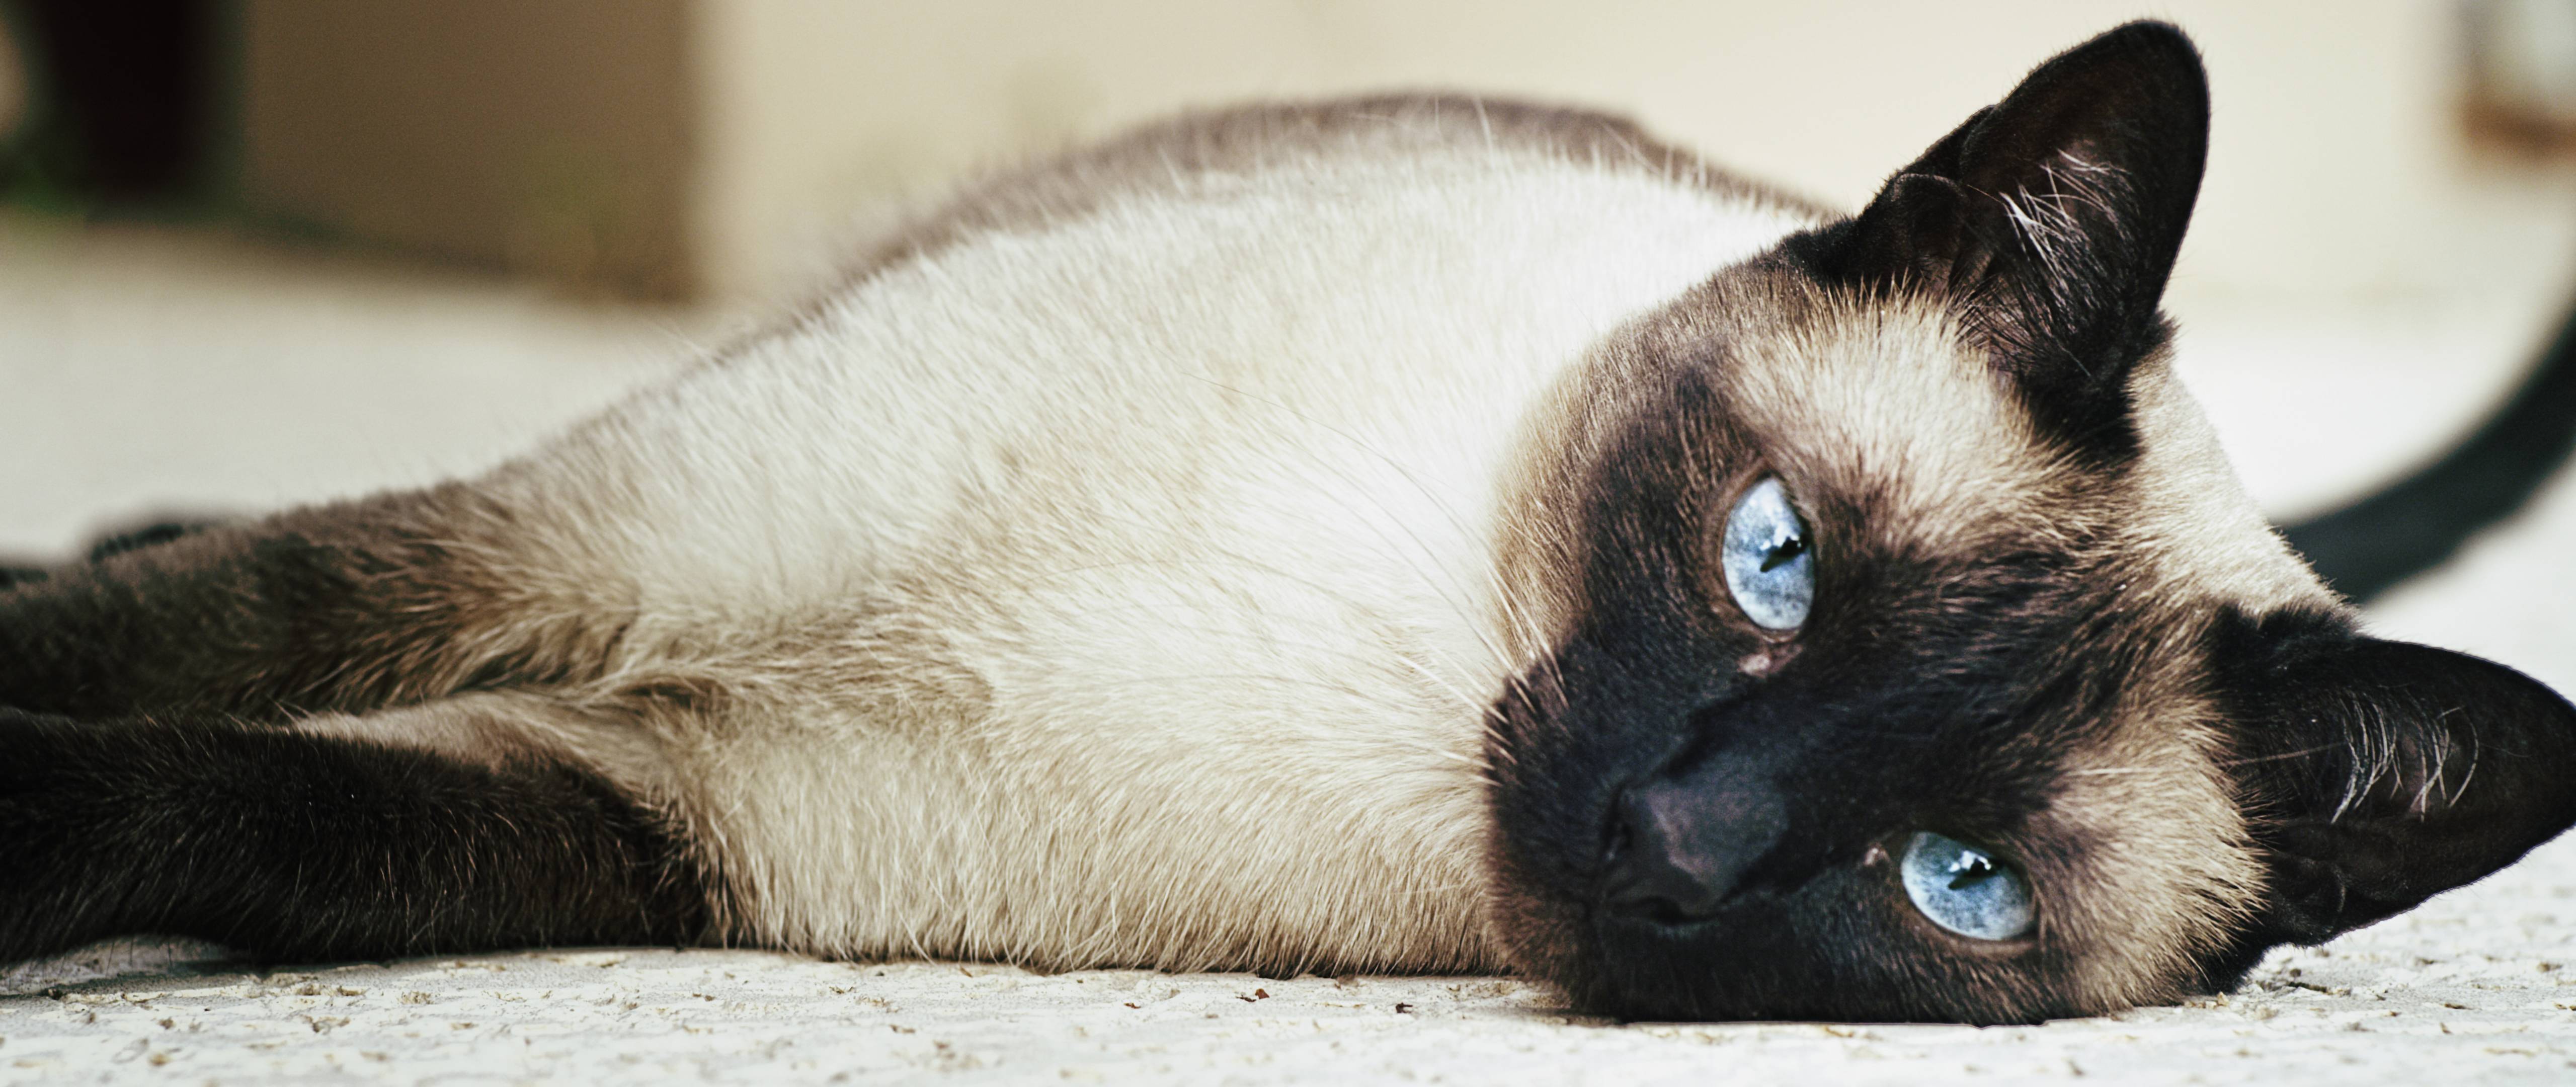 Siamese cat sprawled on the floor wallpaper and image